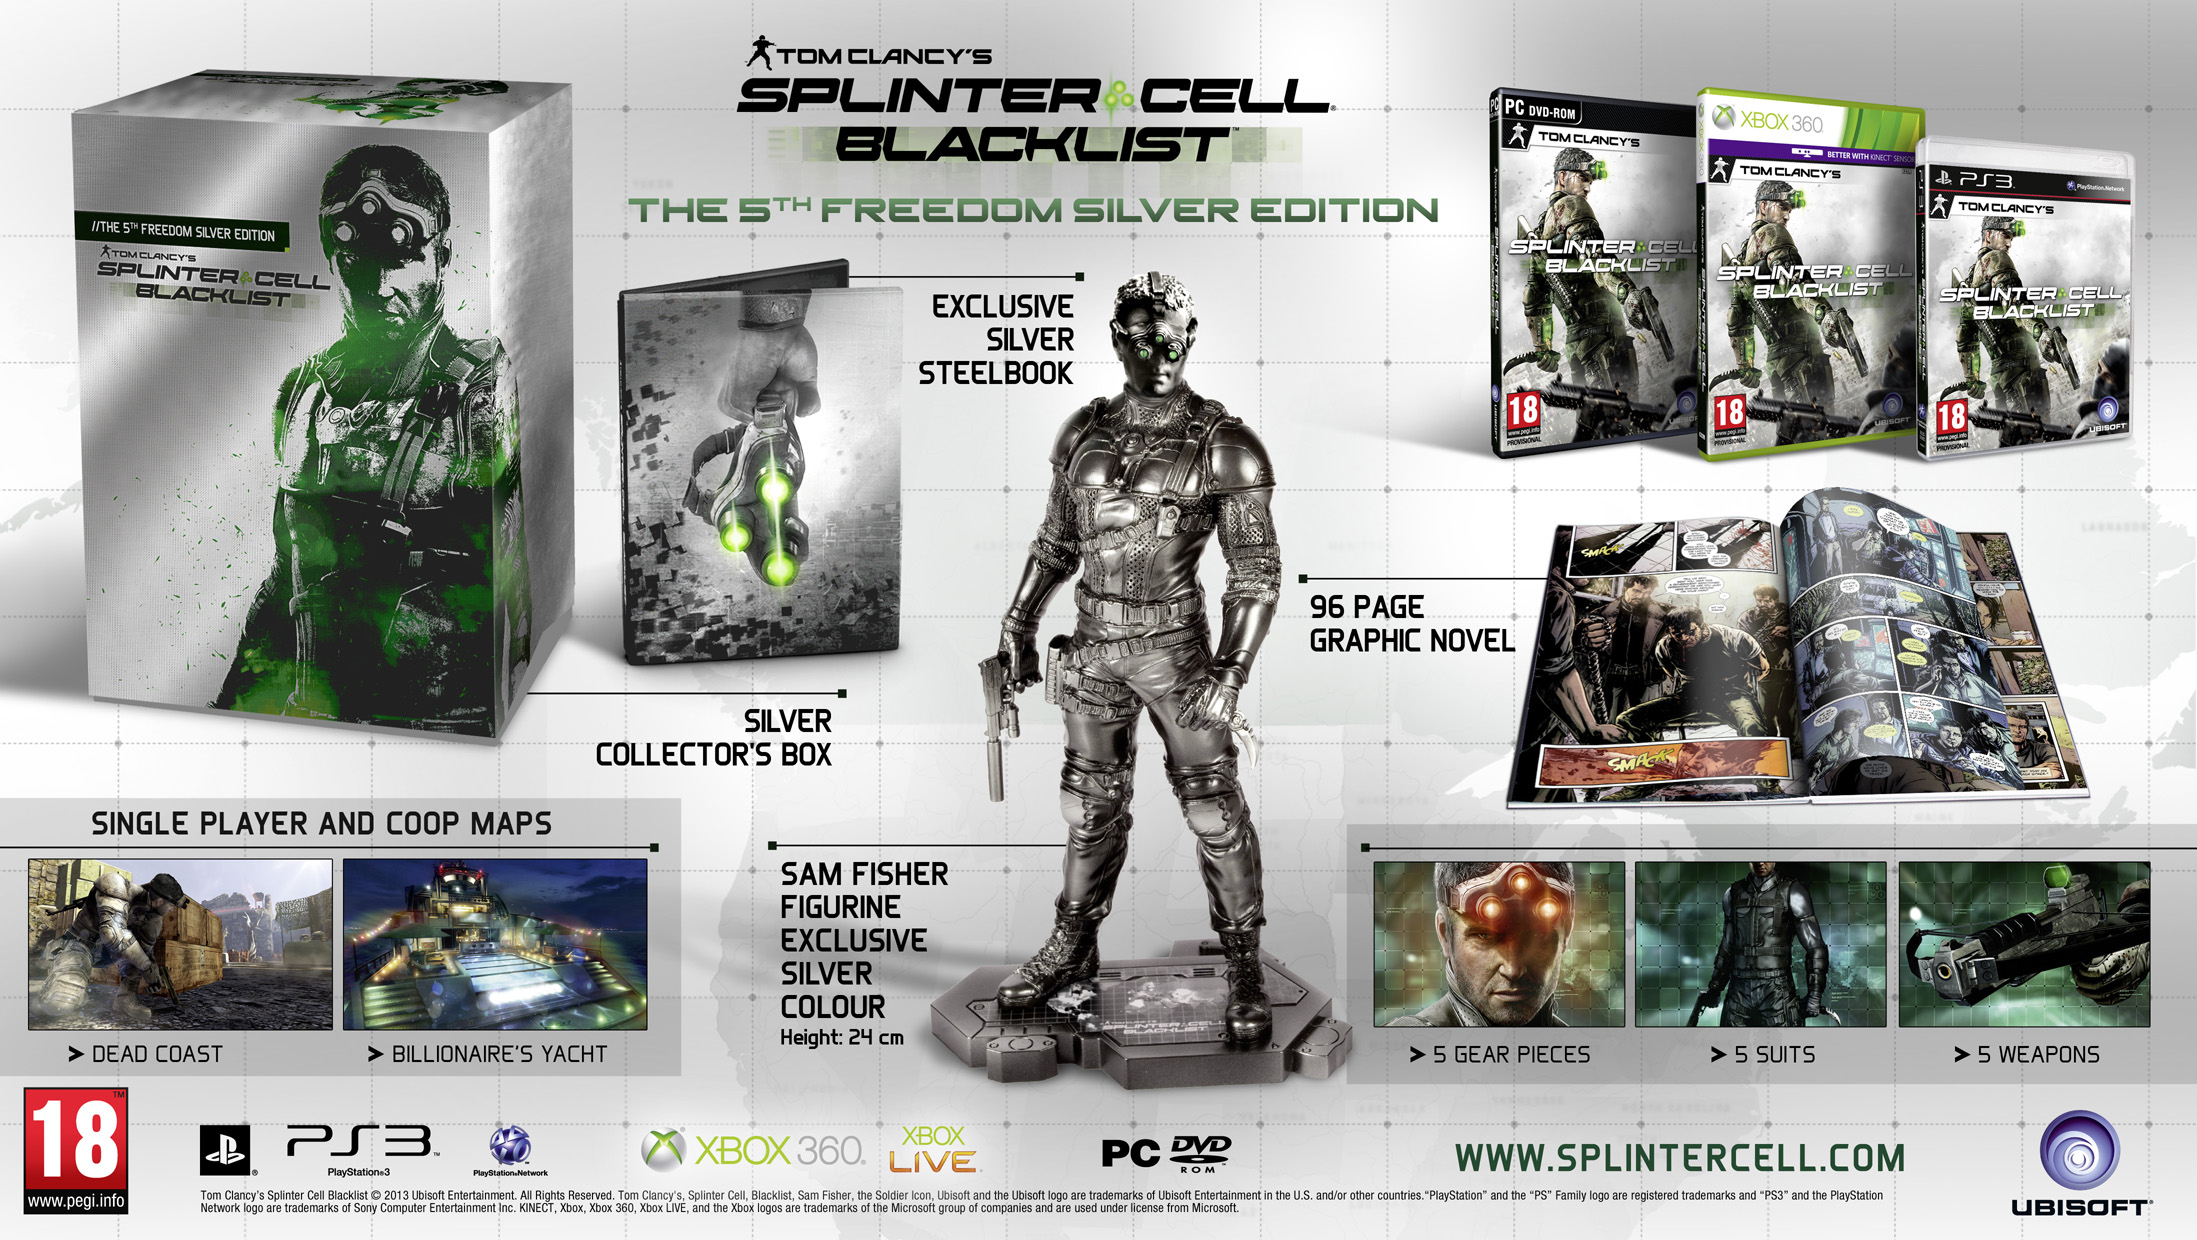 Splinter Cell Blacklist - The 5th Freedom Silver Edition Revealed Pic